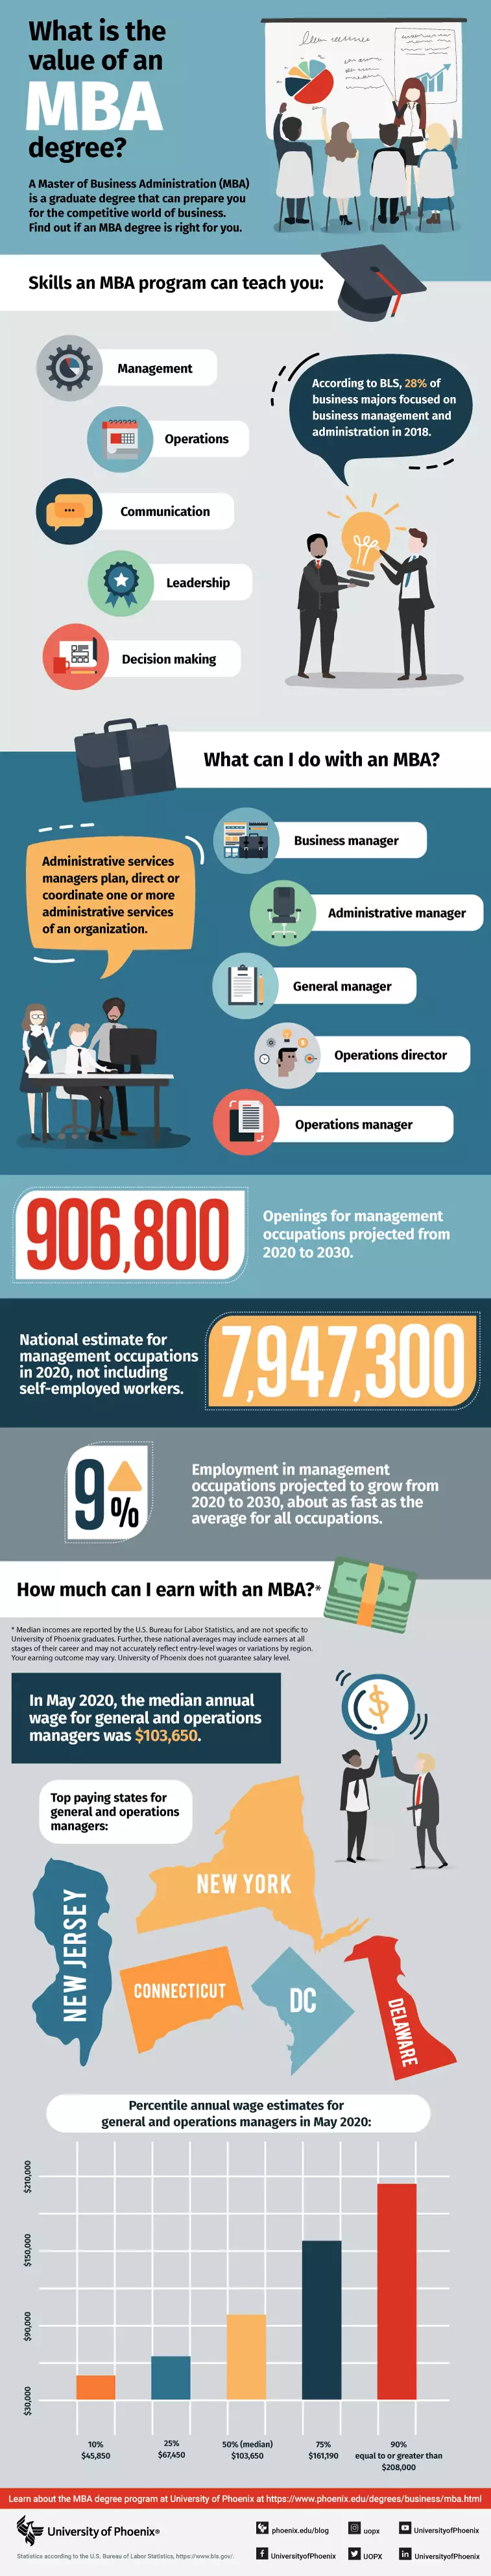 Infographic detailing the value of an MBA including skills and career outcomes